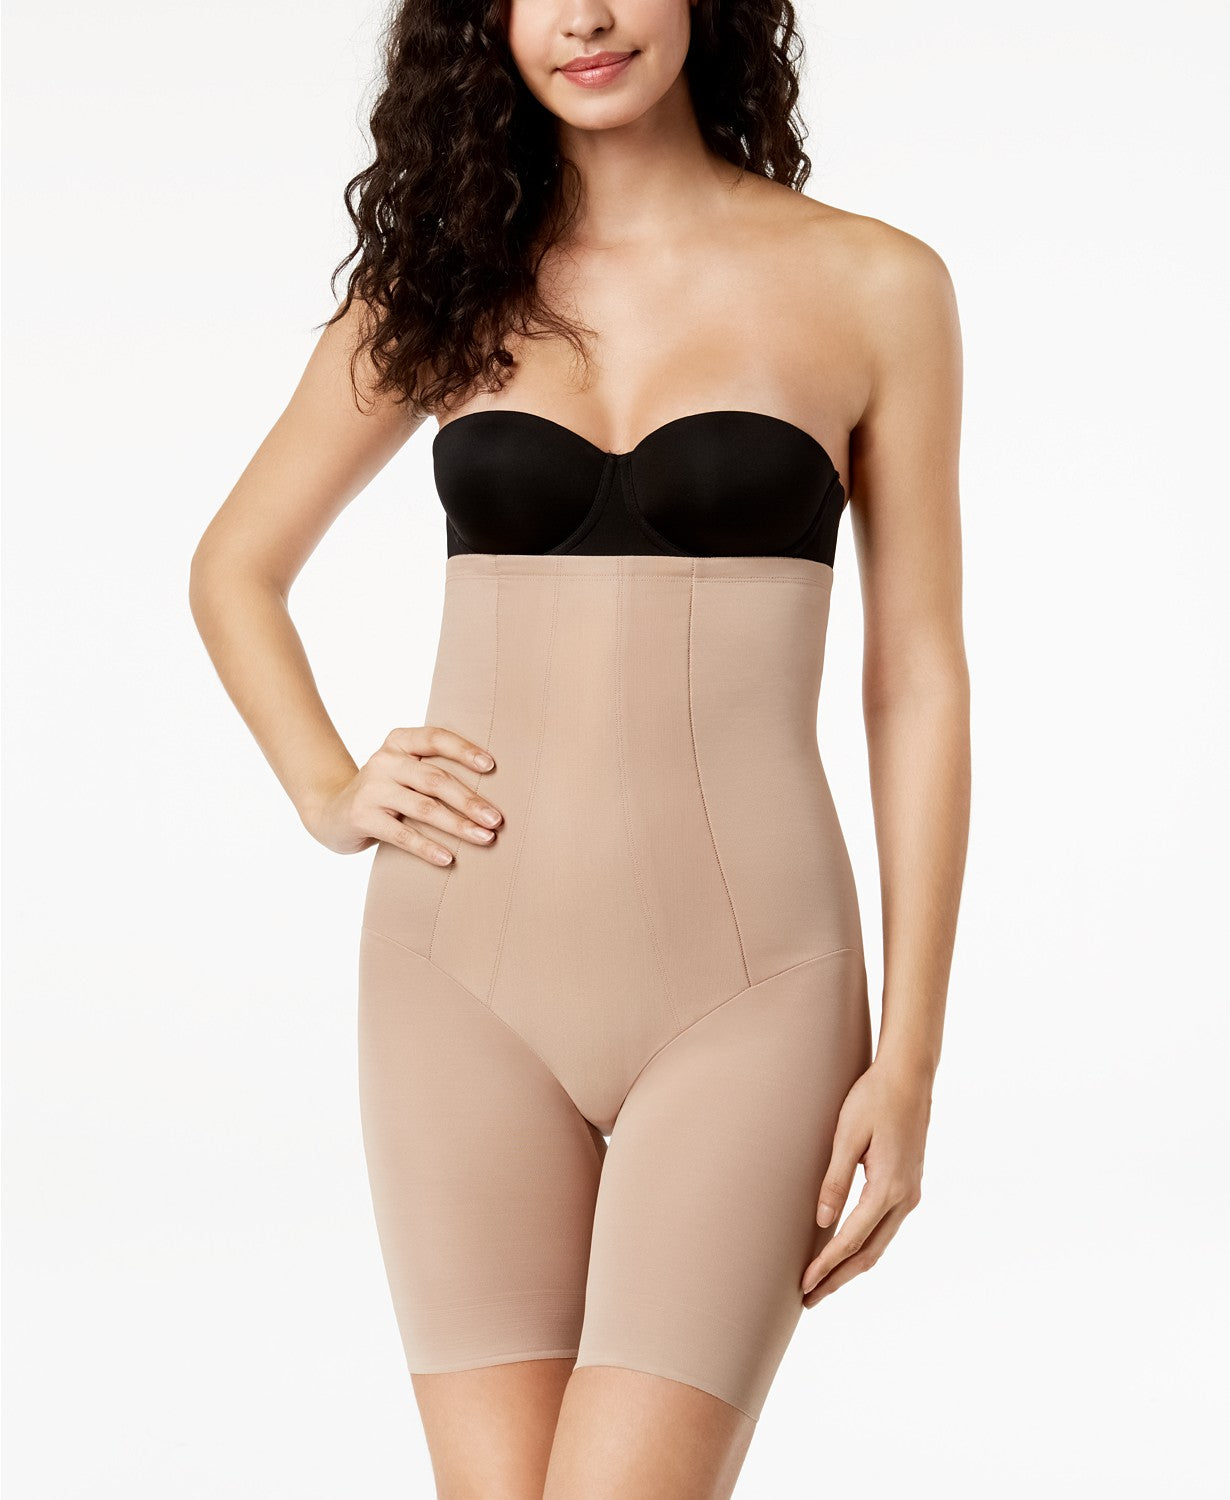 Miraclesuit Womens Fit & Firm High-Waist Mid-Thigh Shaper Style-2358